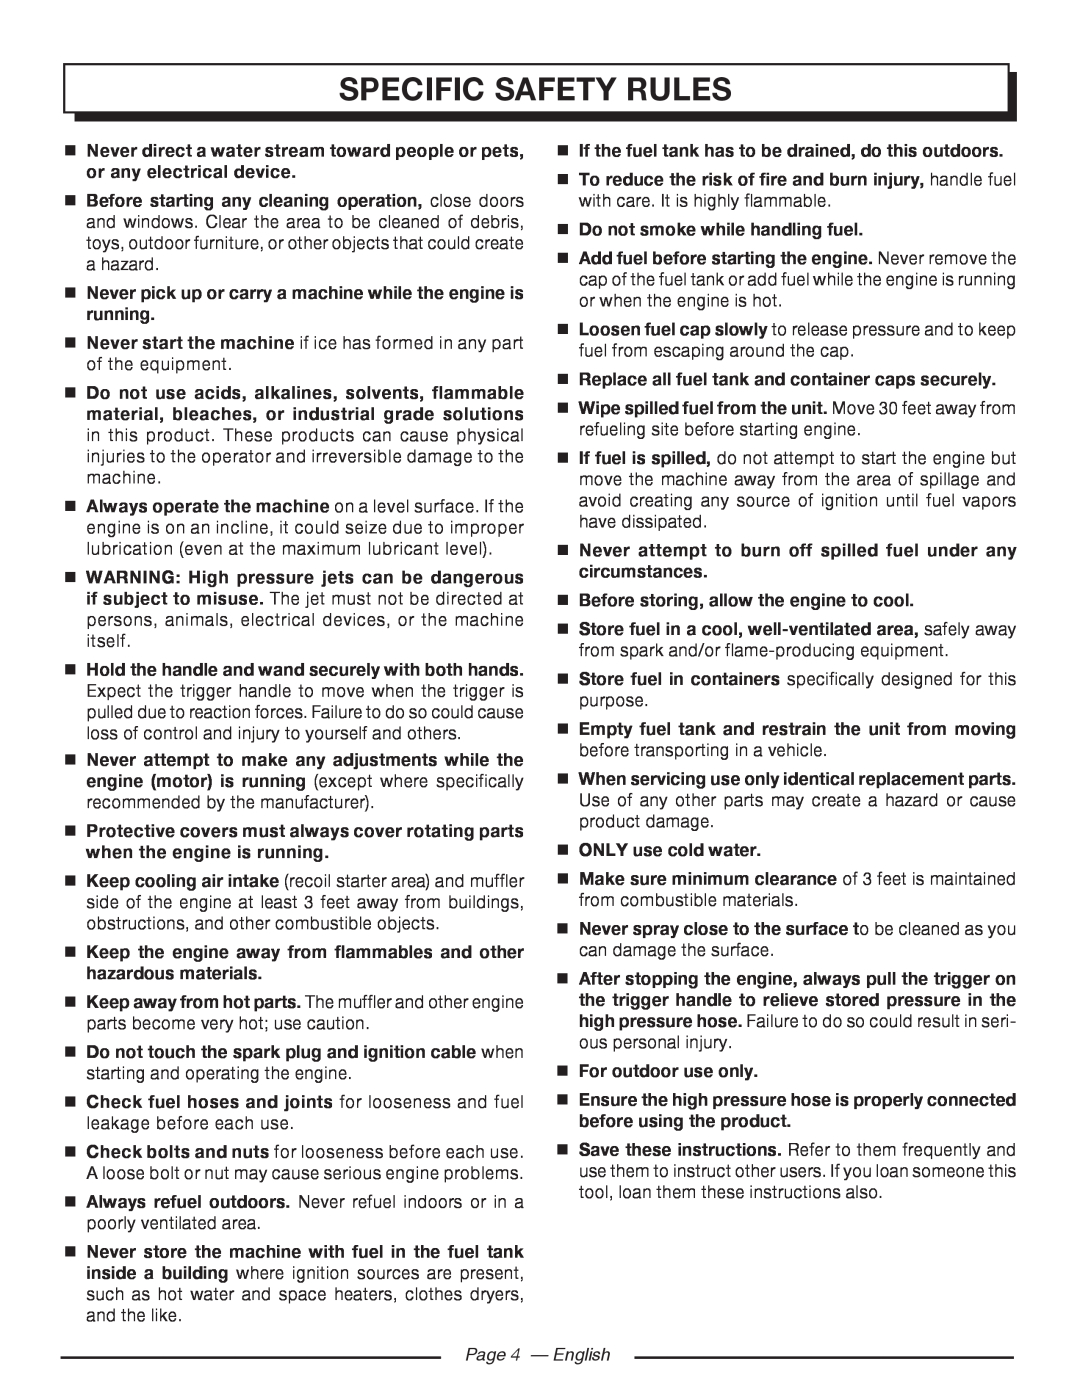 Homelite UT80516 Specific Safety Rules,  Never pick up or carry a machine while the engine is running, Page 4 - English 